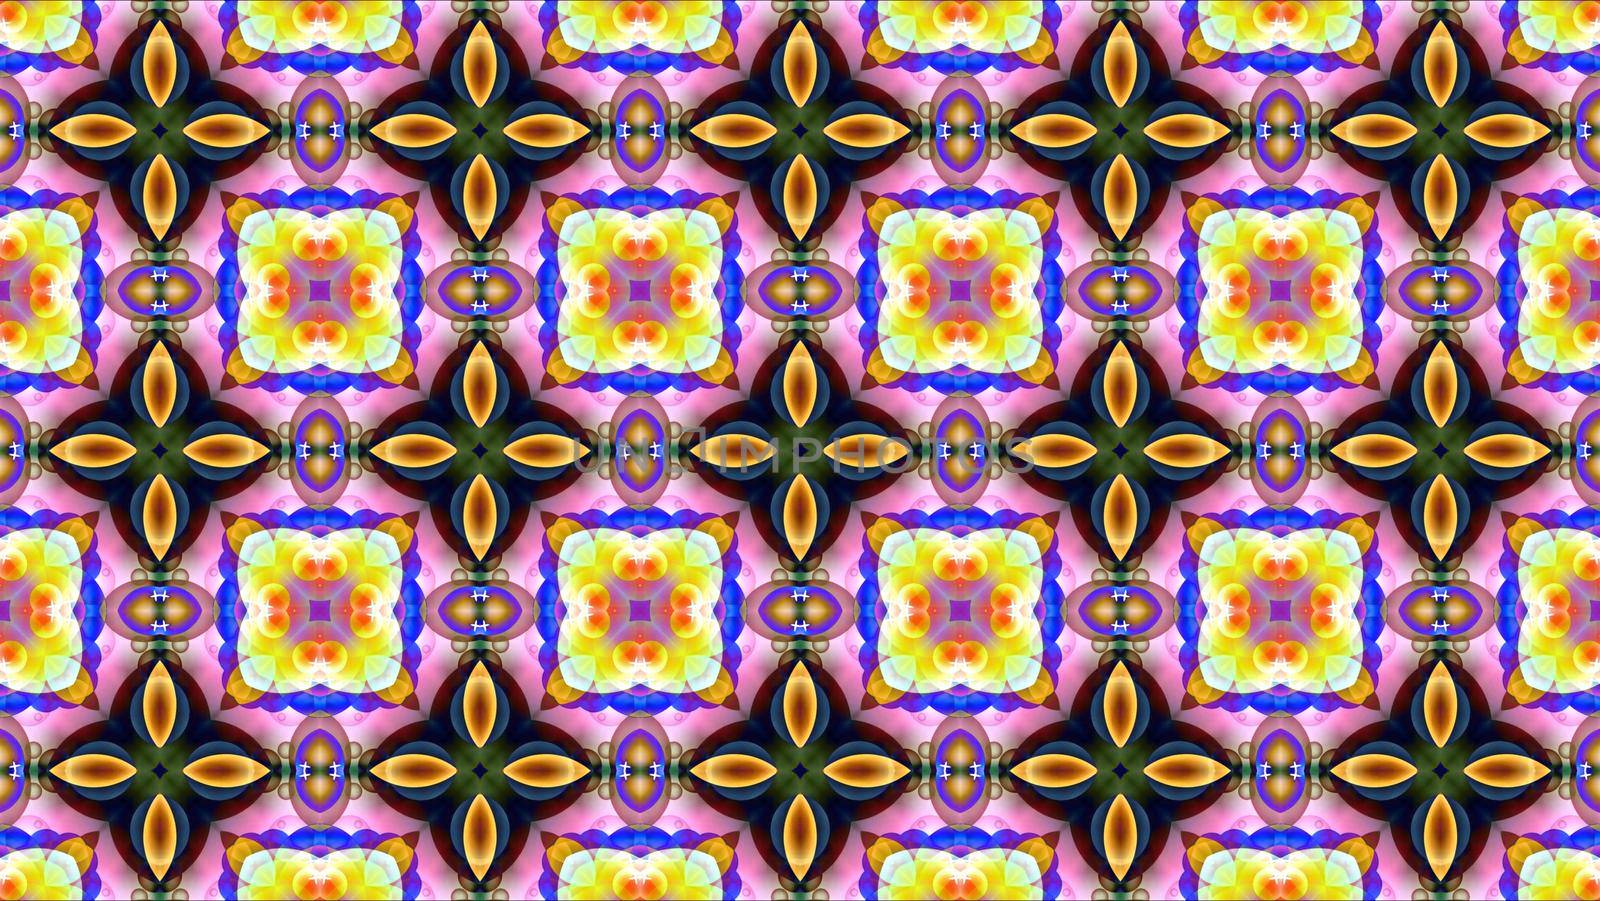 red yellow flower with white stars on purple leaves and black orange four leaves kaleidoscope reflection texture pattern background